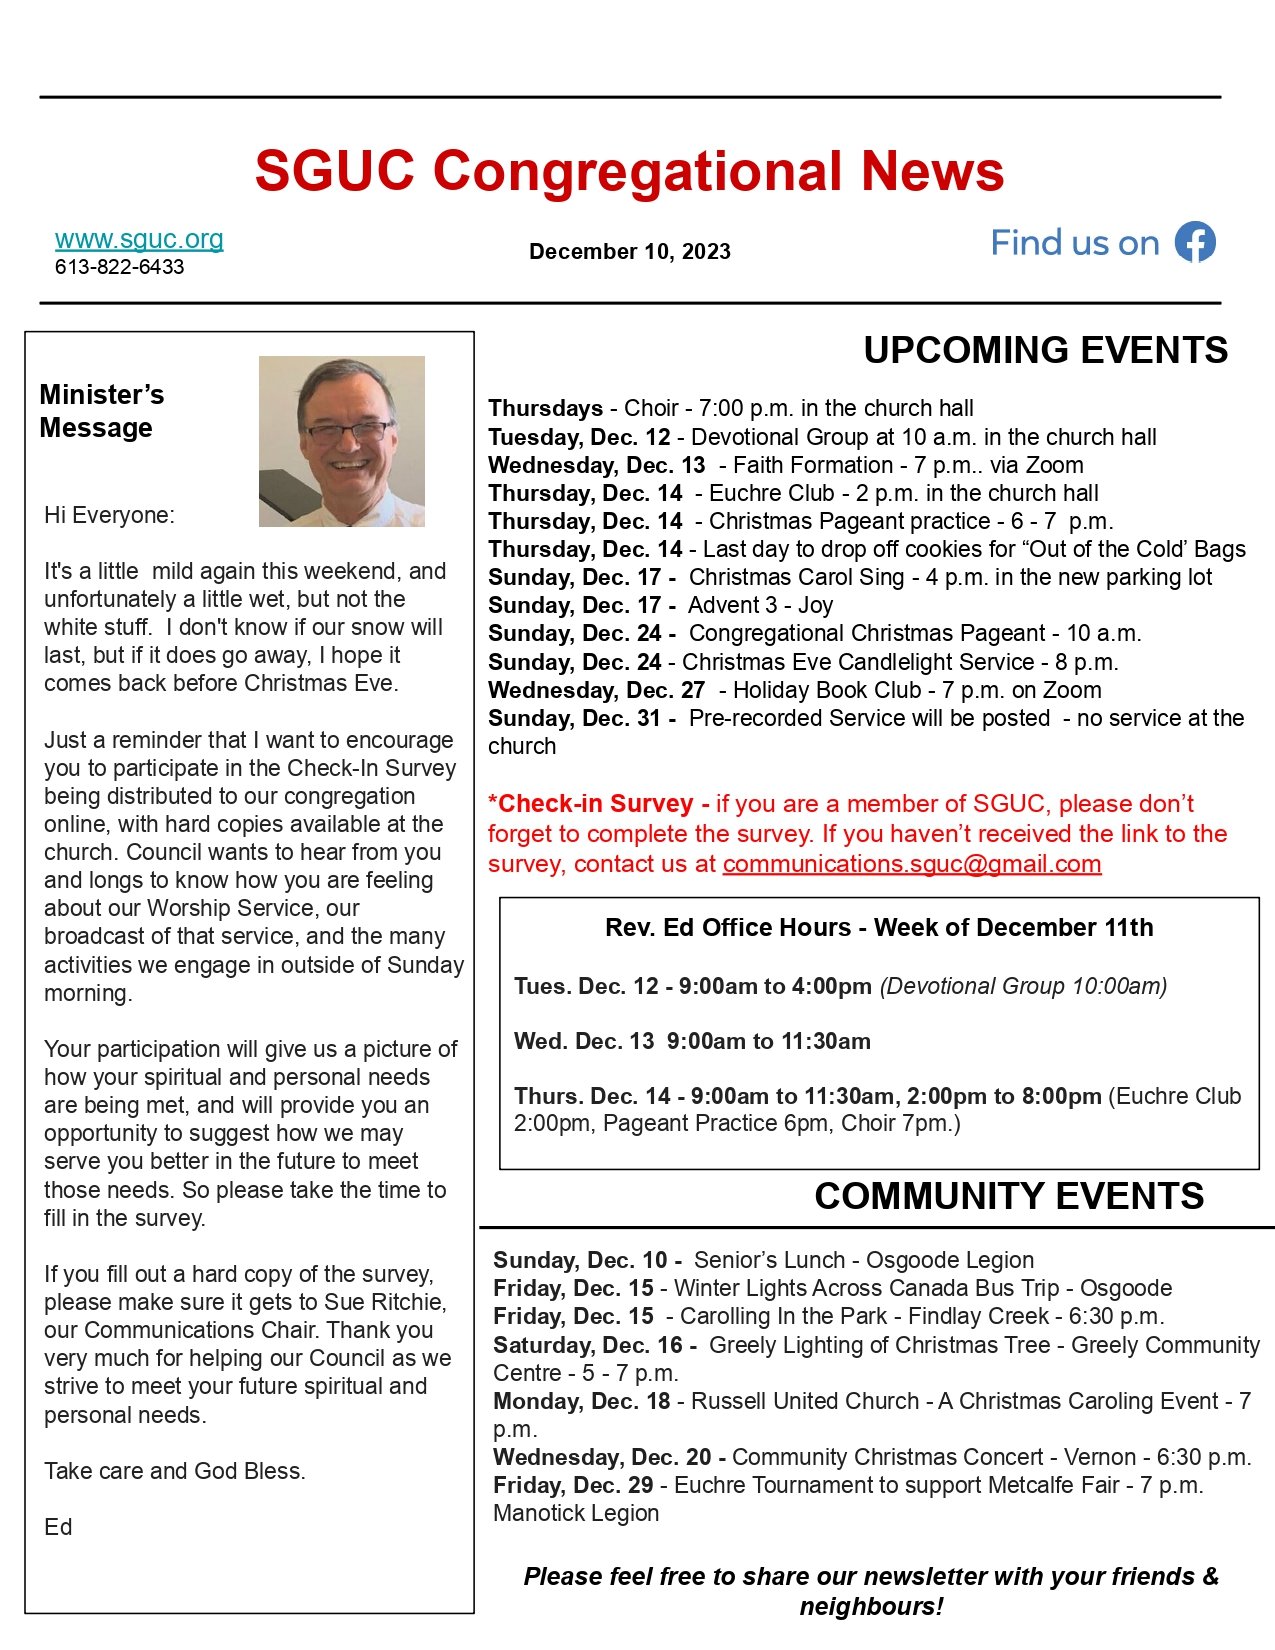 659adaac0f8083003aba7062_Dec 10 Newsletter_link to service.pdf_page-0001.jpg